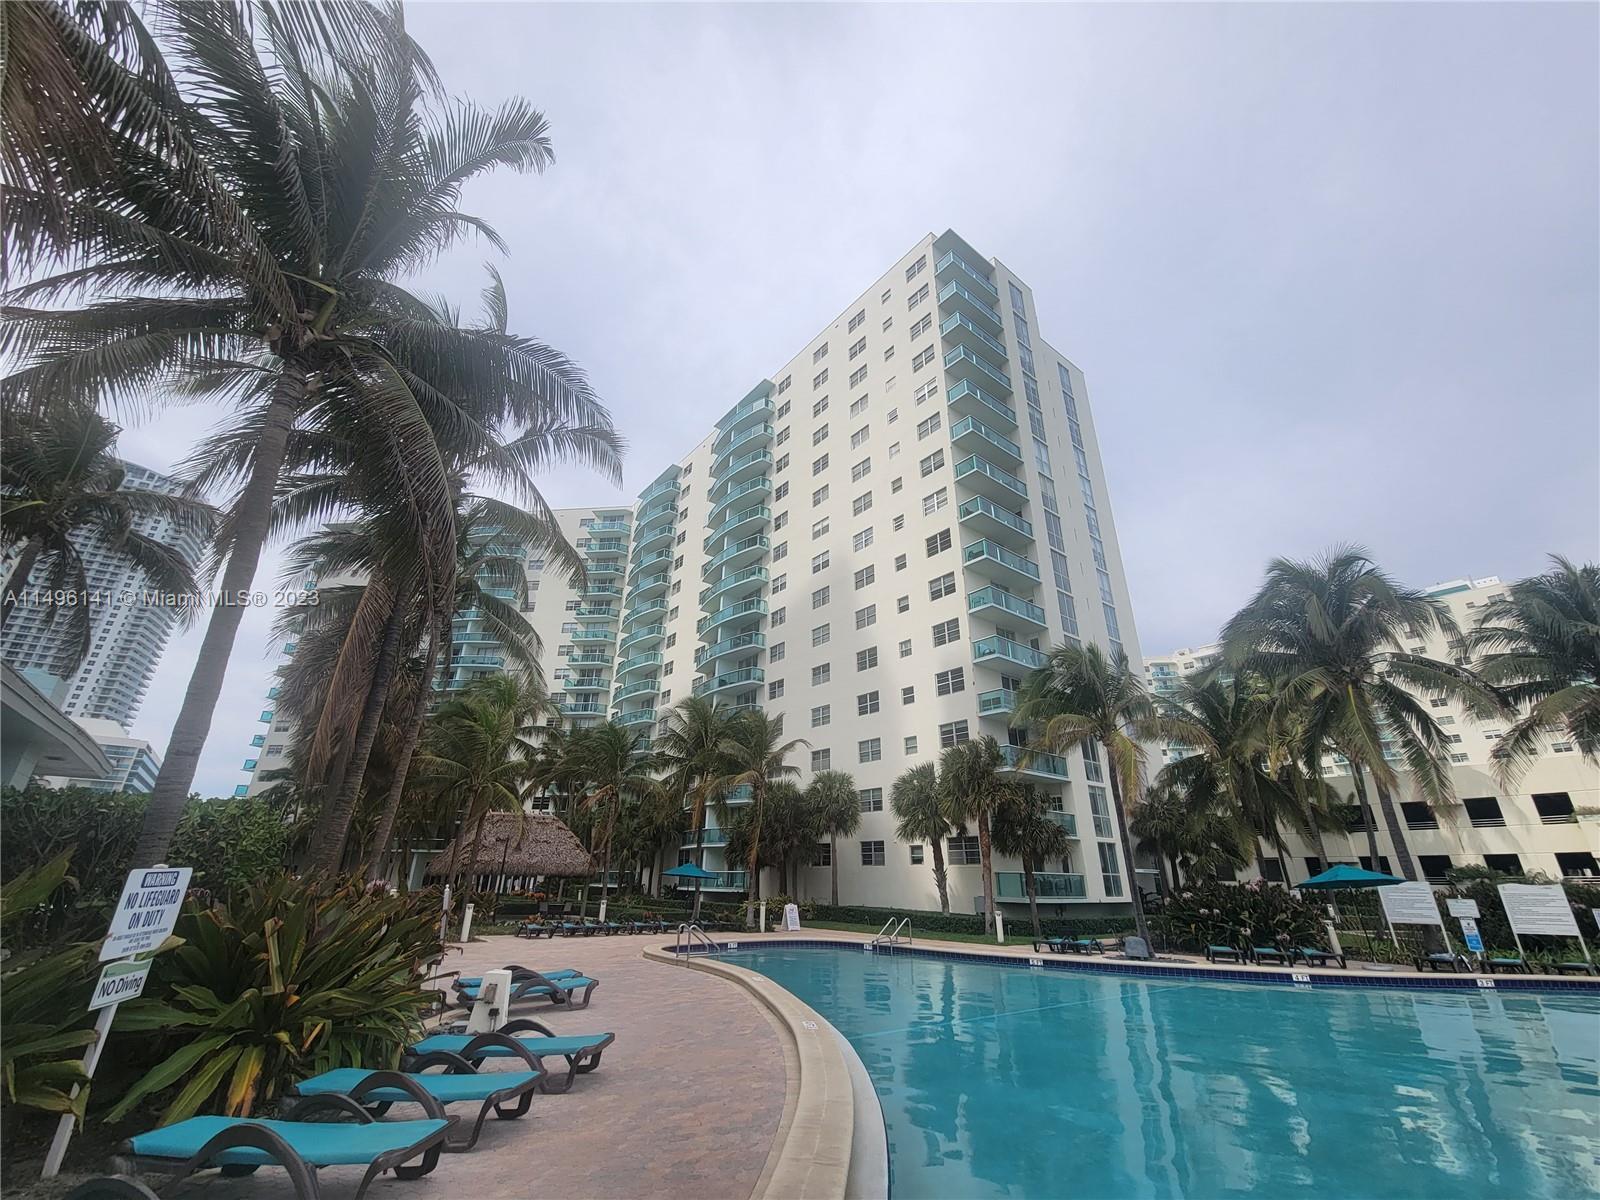 Photo of 3901 S Ocean Dr #7B in Hollywood, FL